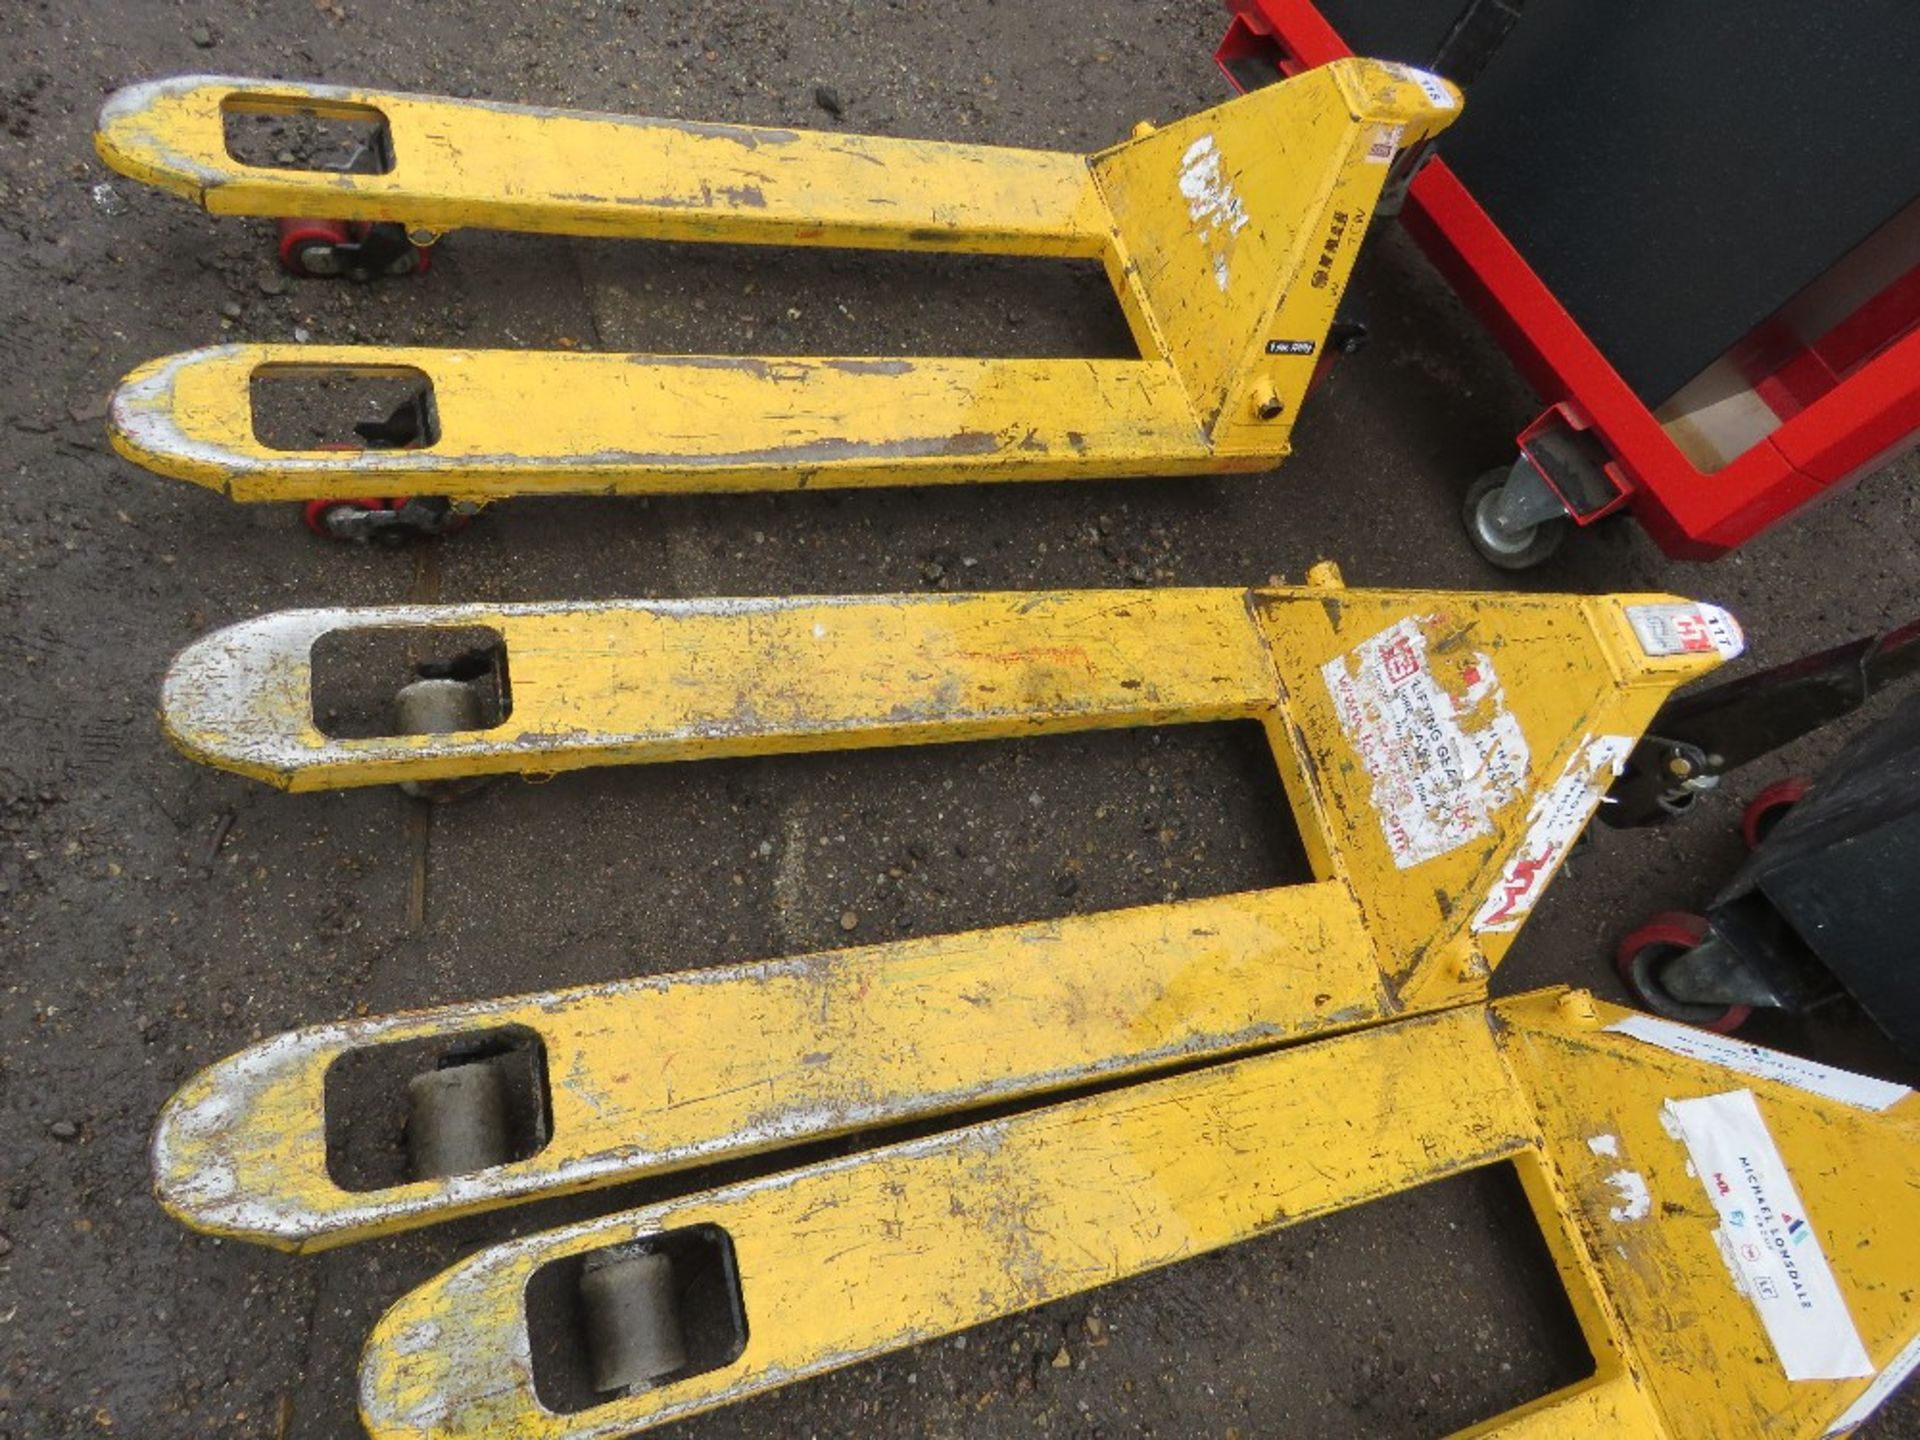 HYDRAULIC PALLET TRUCK. SOURCED FROM LARGE CONSTRUCTION COMPANY LIQUIDATION.